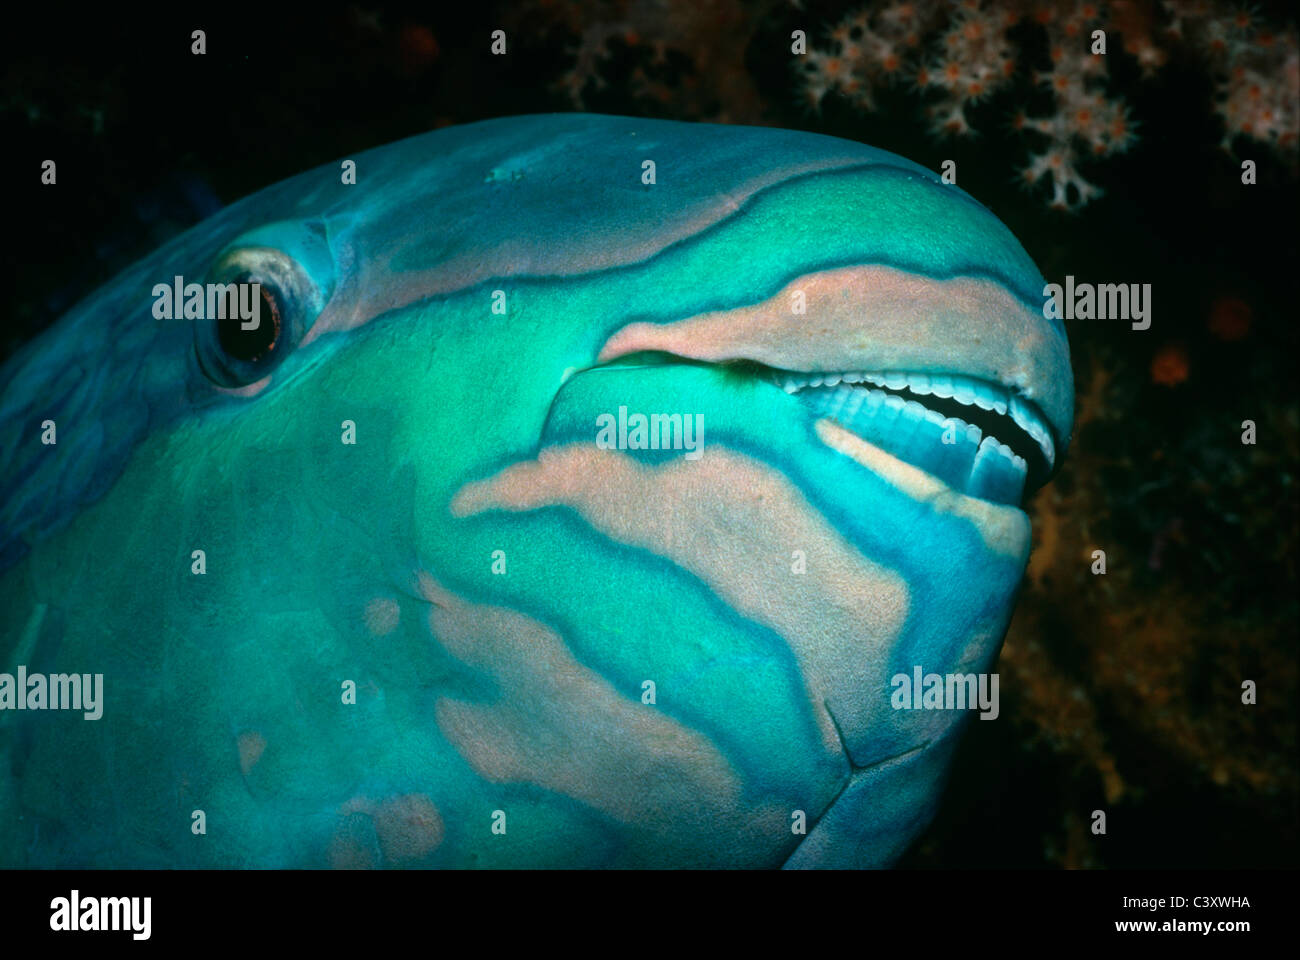 Face of Bridled Parrotfish (Scarus frenatus). Egypt, Red Sea. Stock Photo